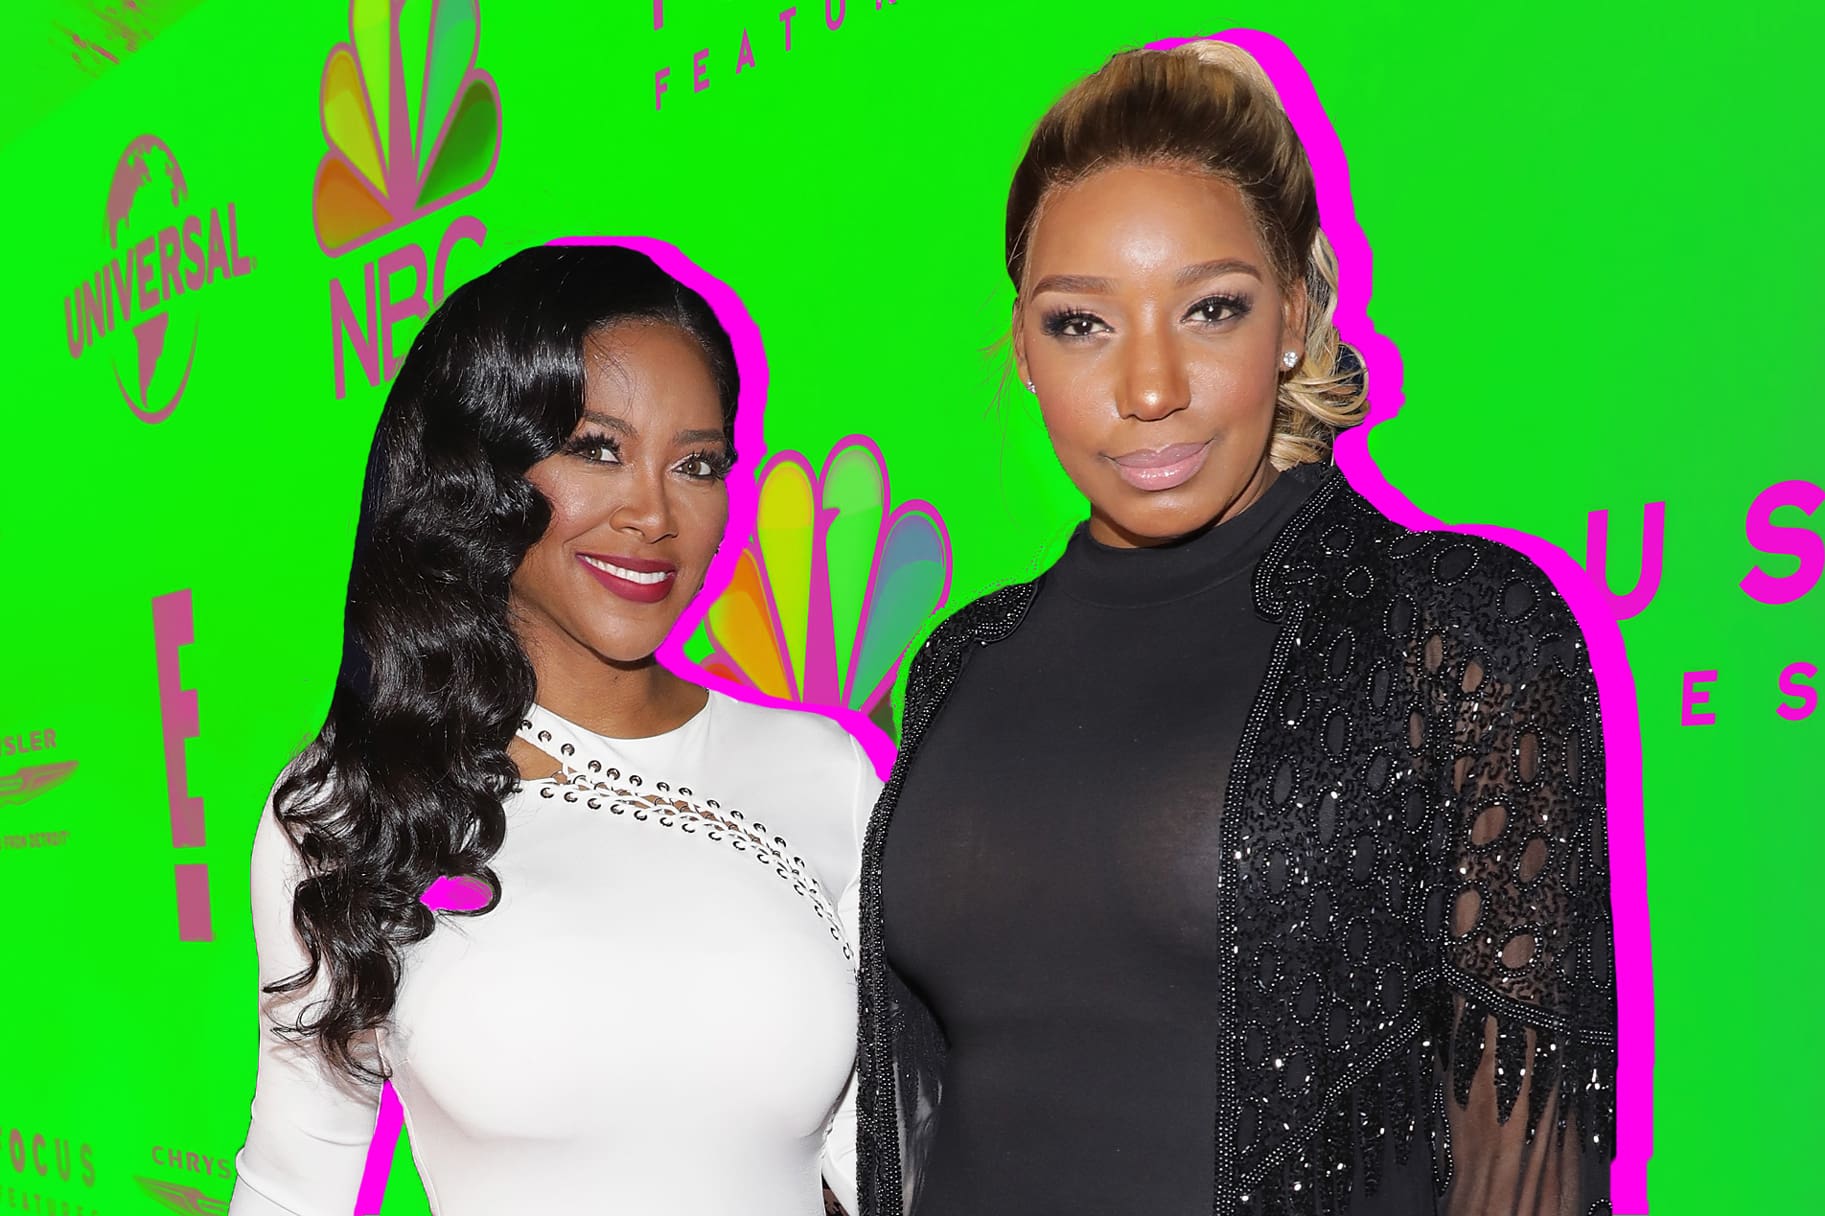 NeNe Leakes Says That The Door Is Open For Kenya Moore And Phaedra Parks In Her World - Watch The Video